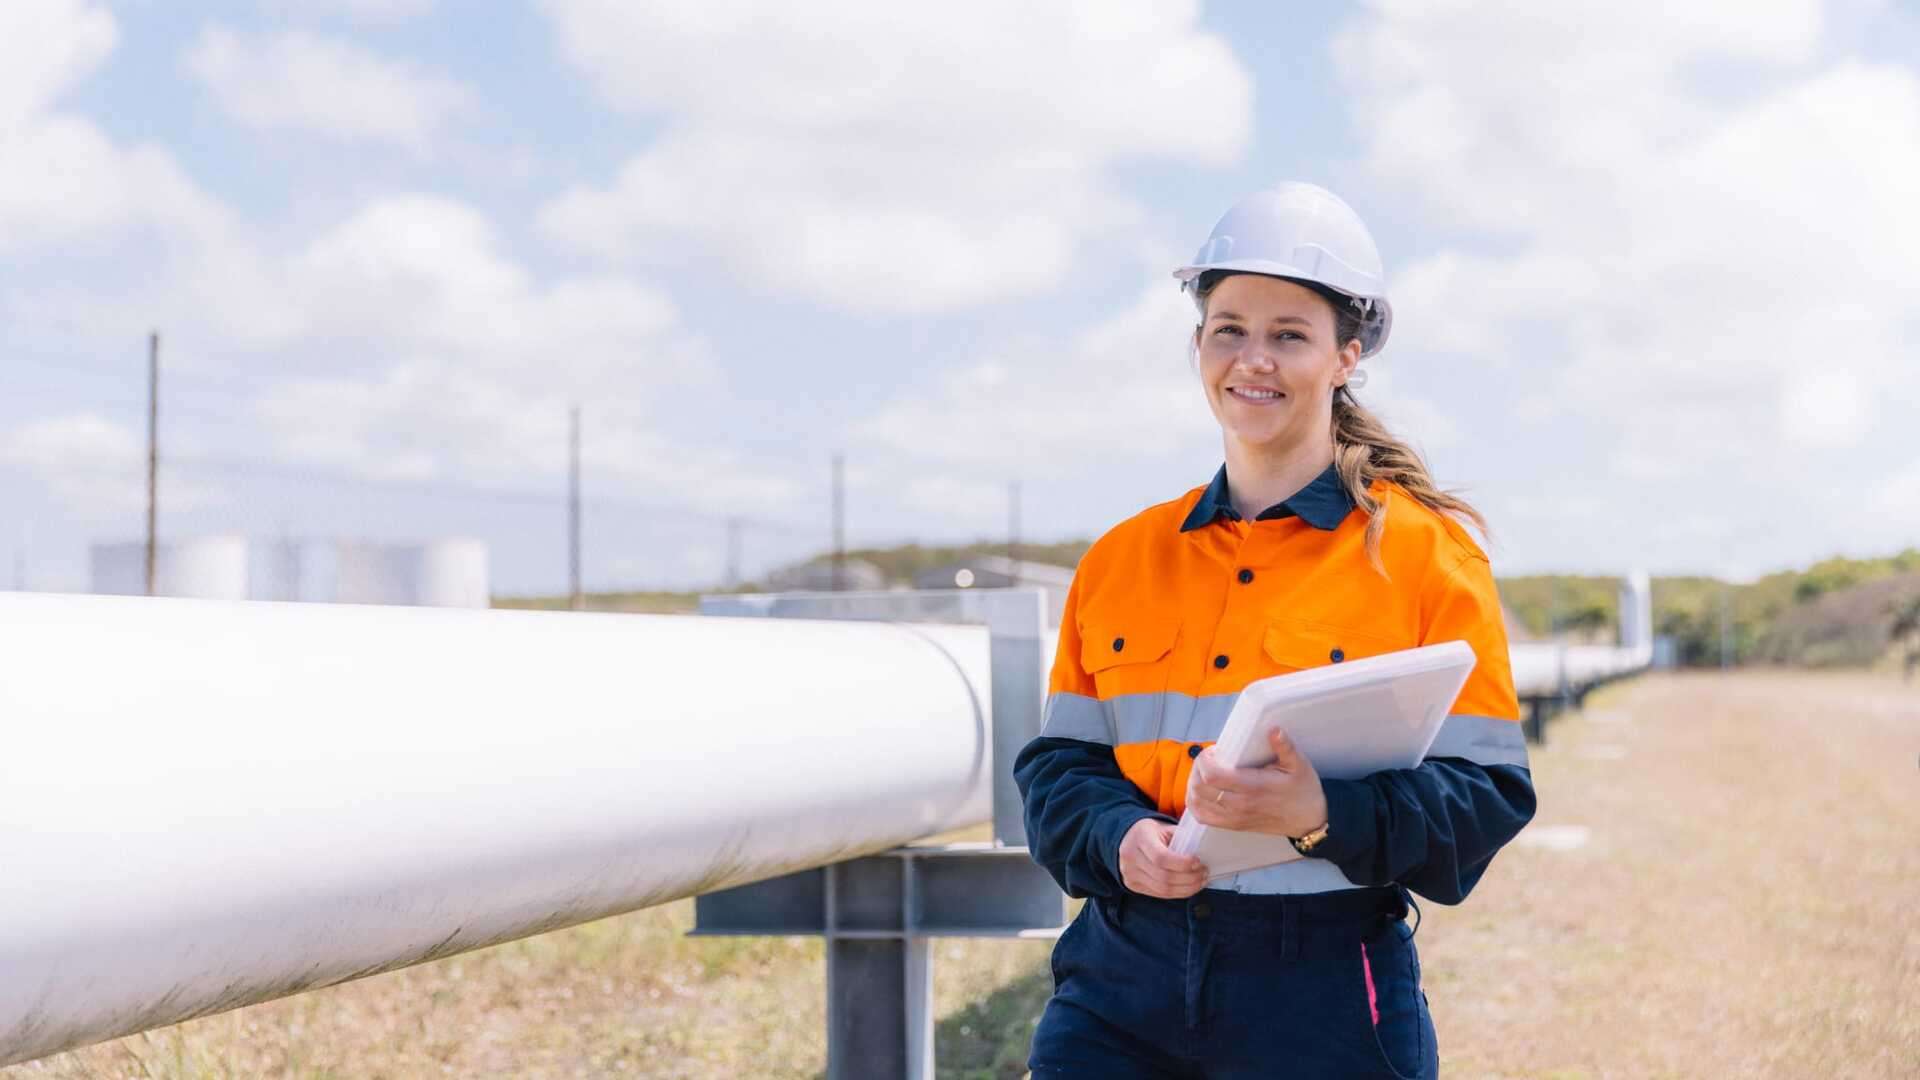 Engineering Cadet Student wearing PPE standing with a large piping structure